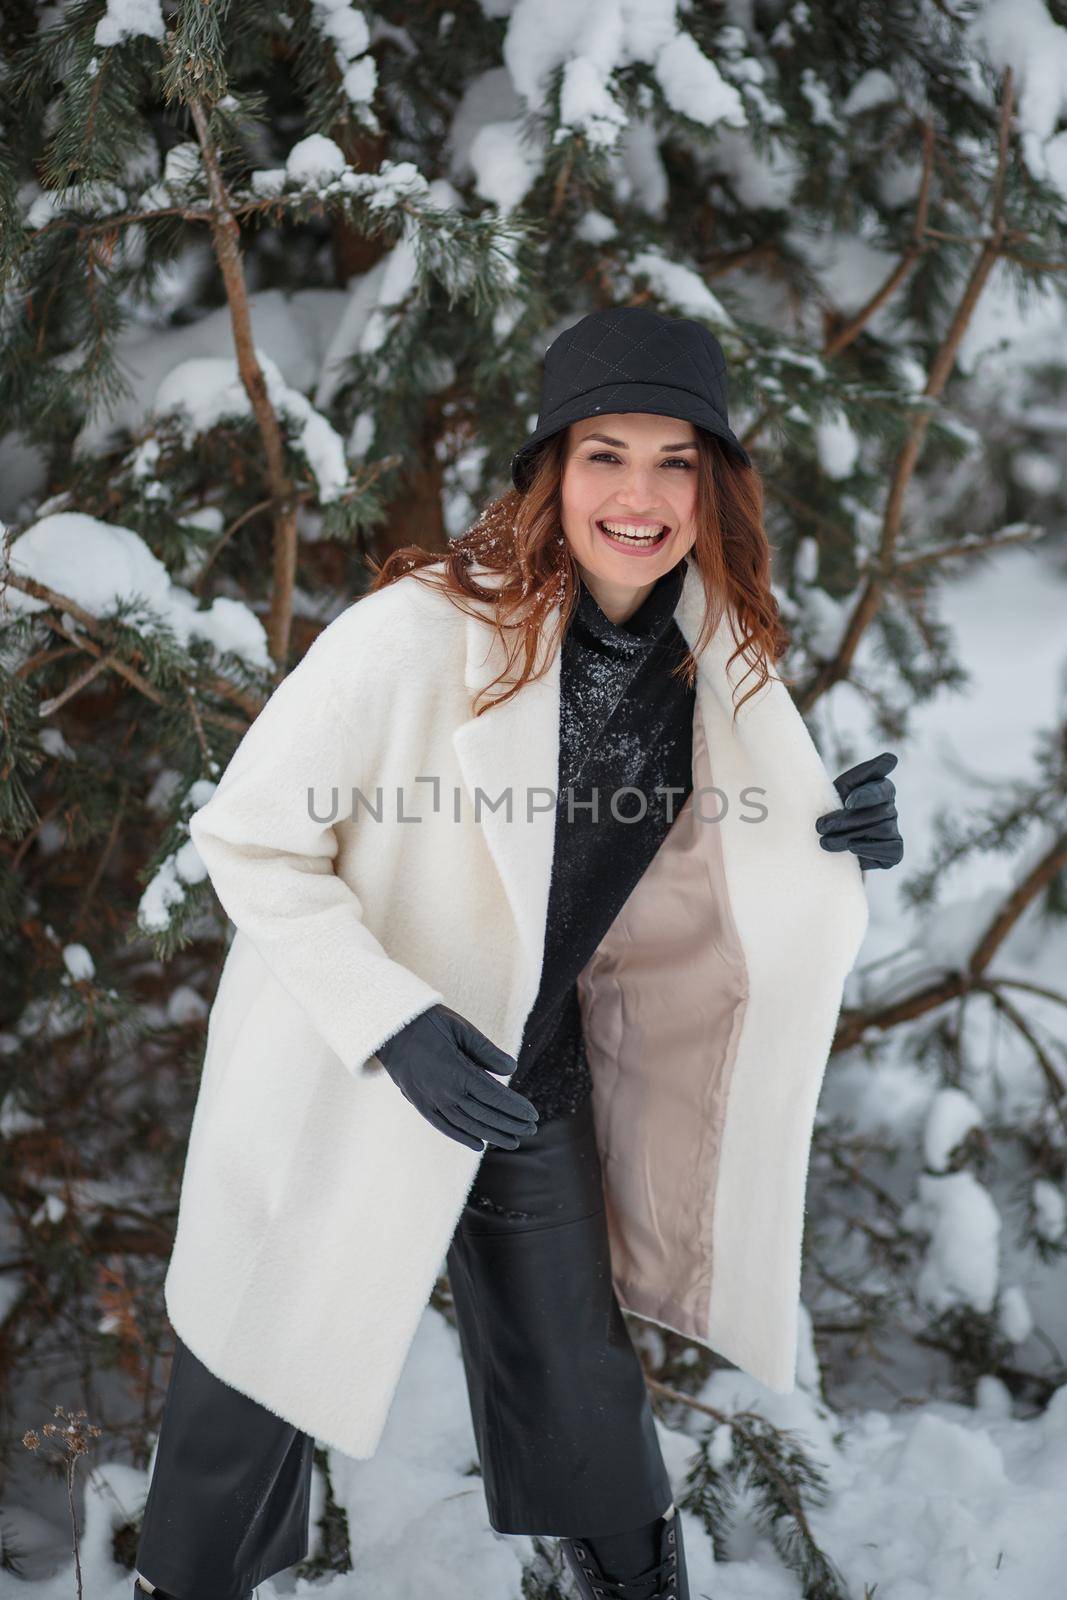 A model in the Christmas winter forest, standing under the Christmas tree.